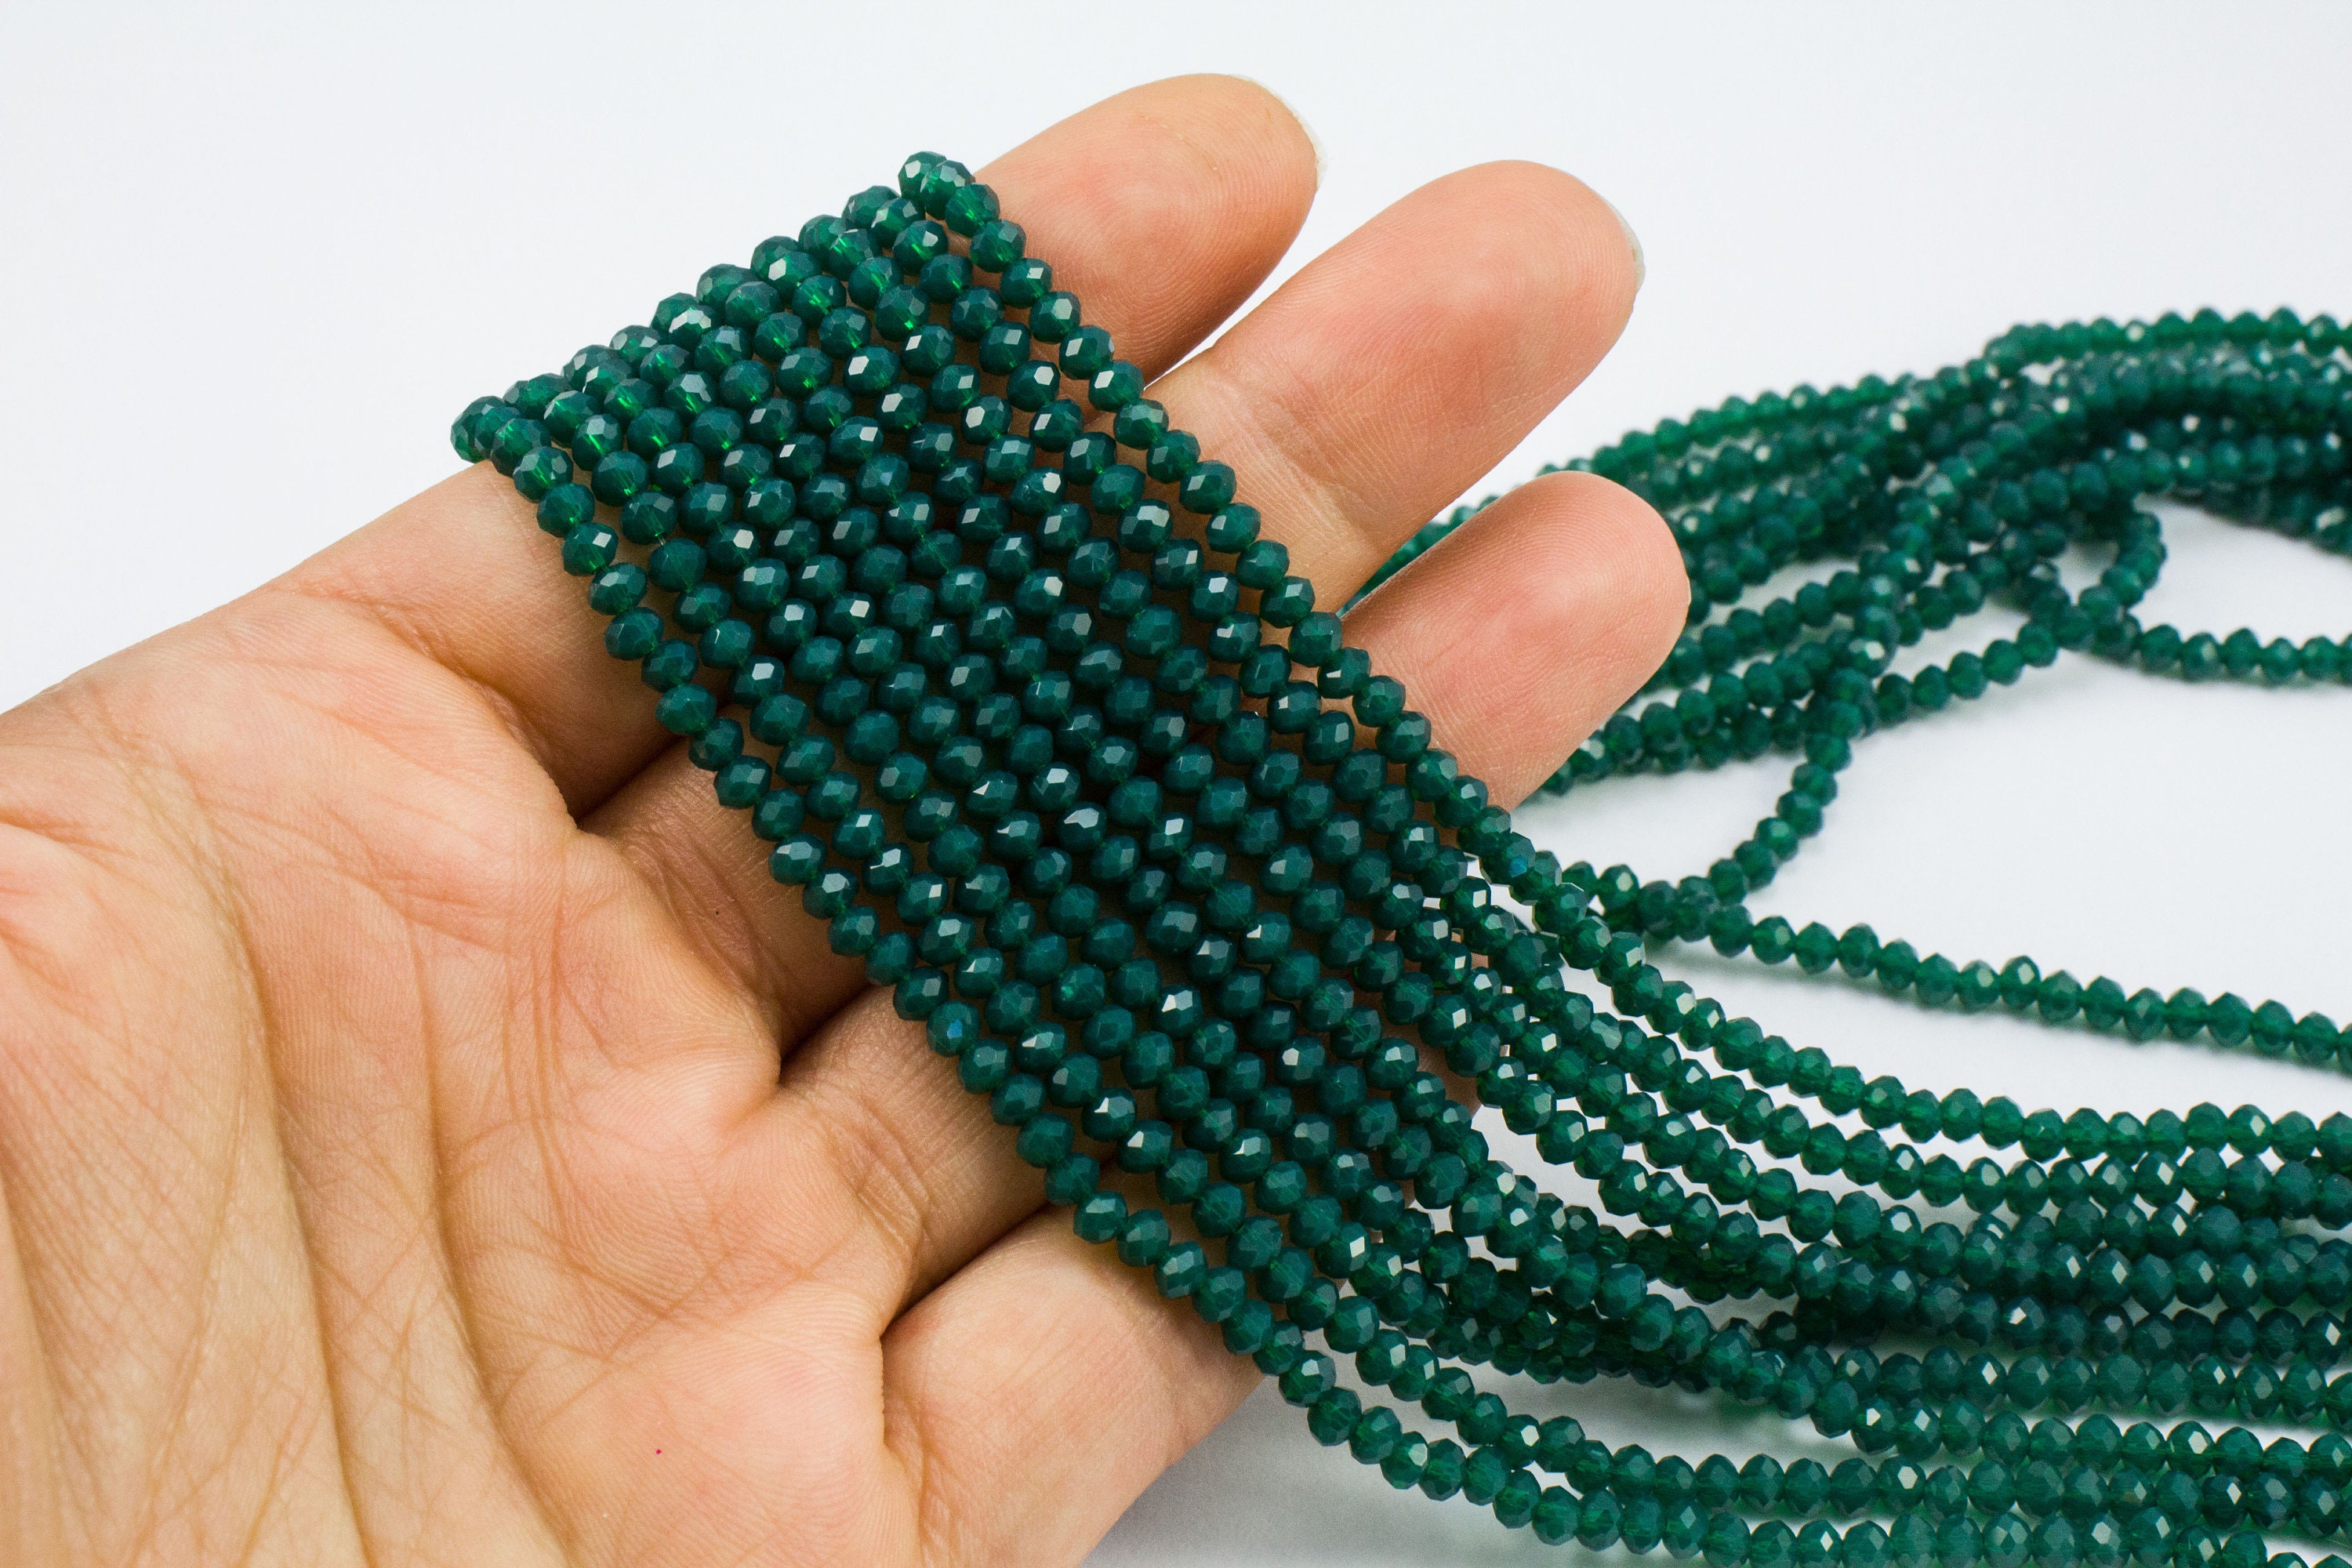 Green Crystal Beads 8mm Beads for Jewelry Making Bulk 180 pcs Emerald  Roundelle